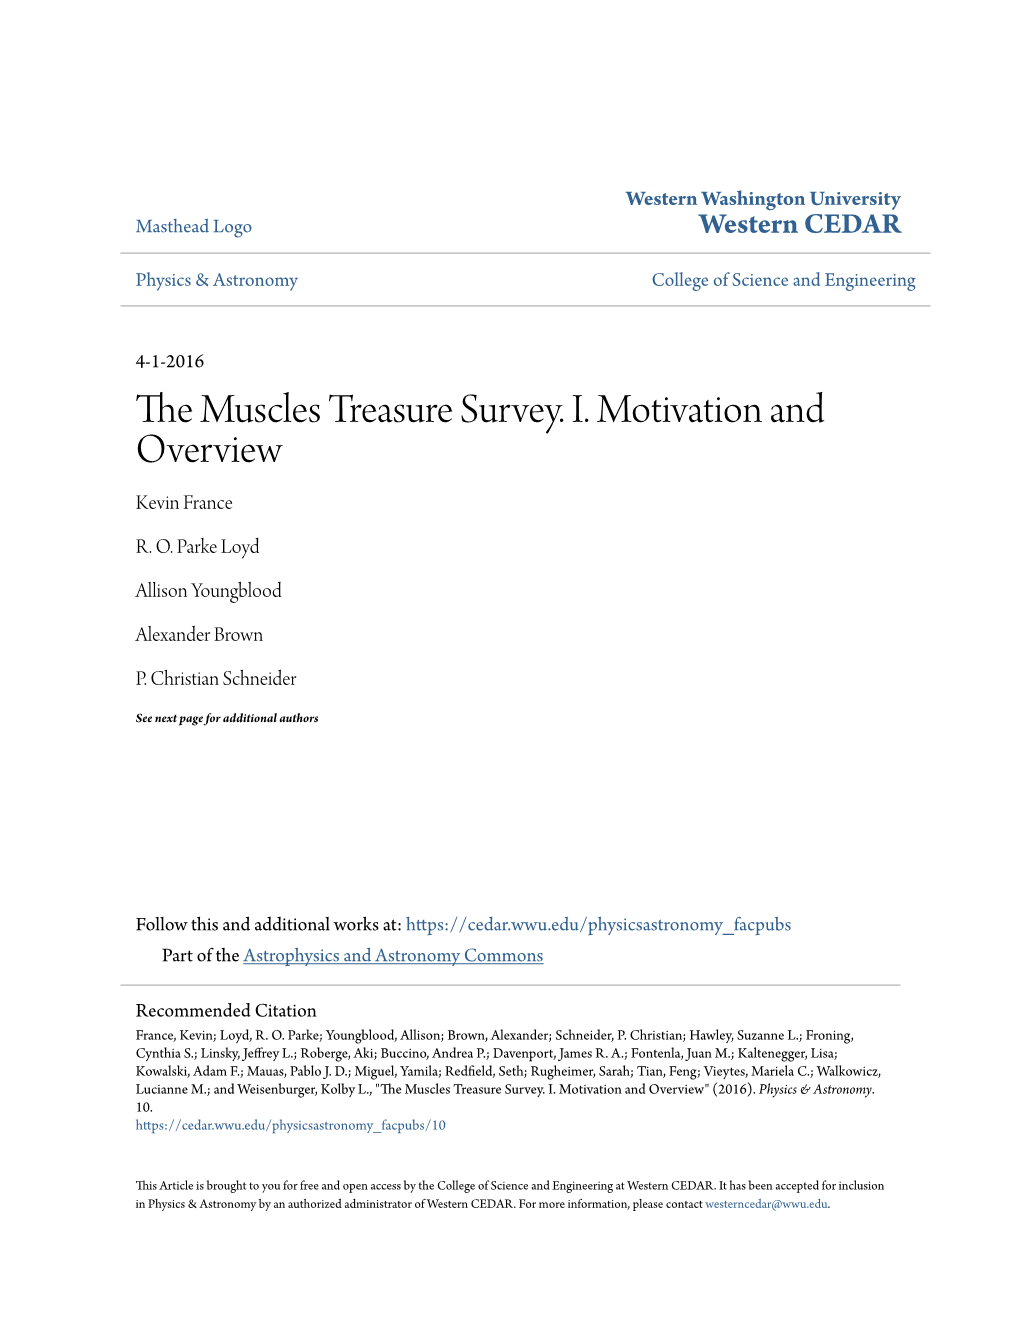 The Muscles Treasure Survey. I. Motivation and Overview